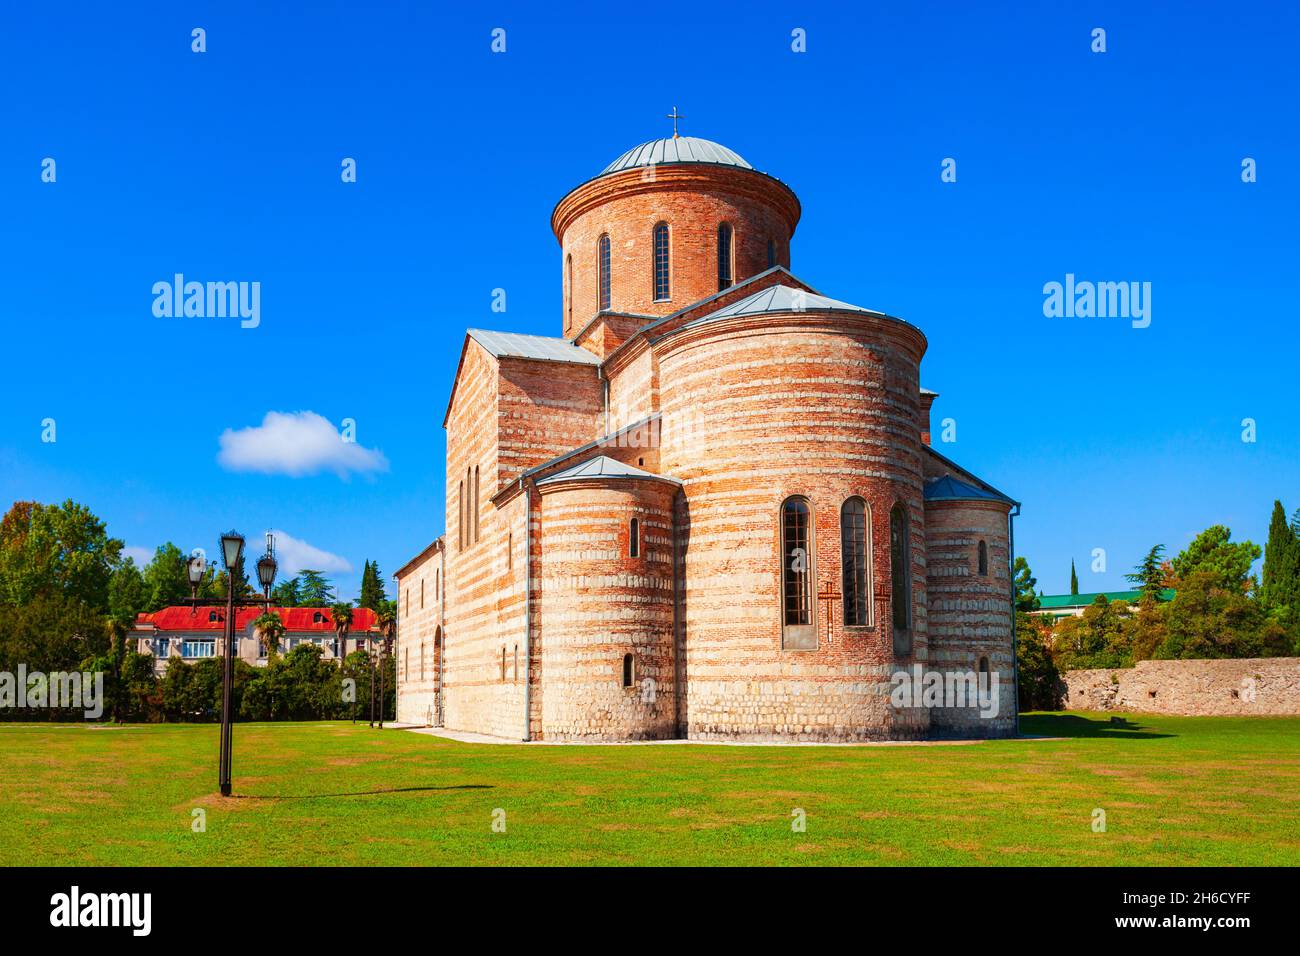 Pitsunda Cathedral or St. Andrew the Apostle Cathedral is a Georgian Orthodox Cathedral in Pitsunda, Gagra district of Abkhazia in Georgia. Stock Photo